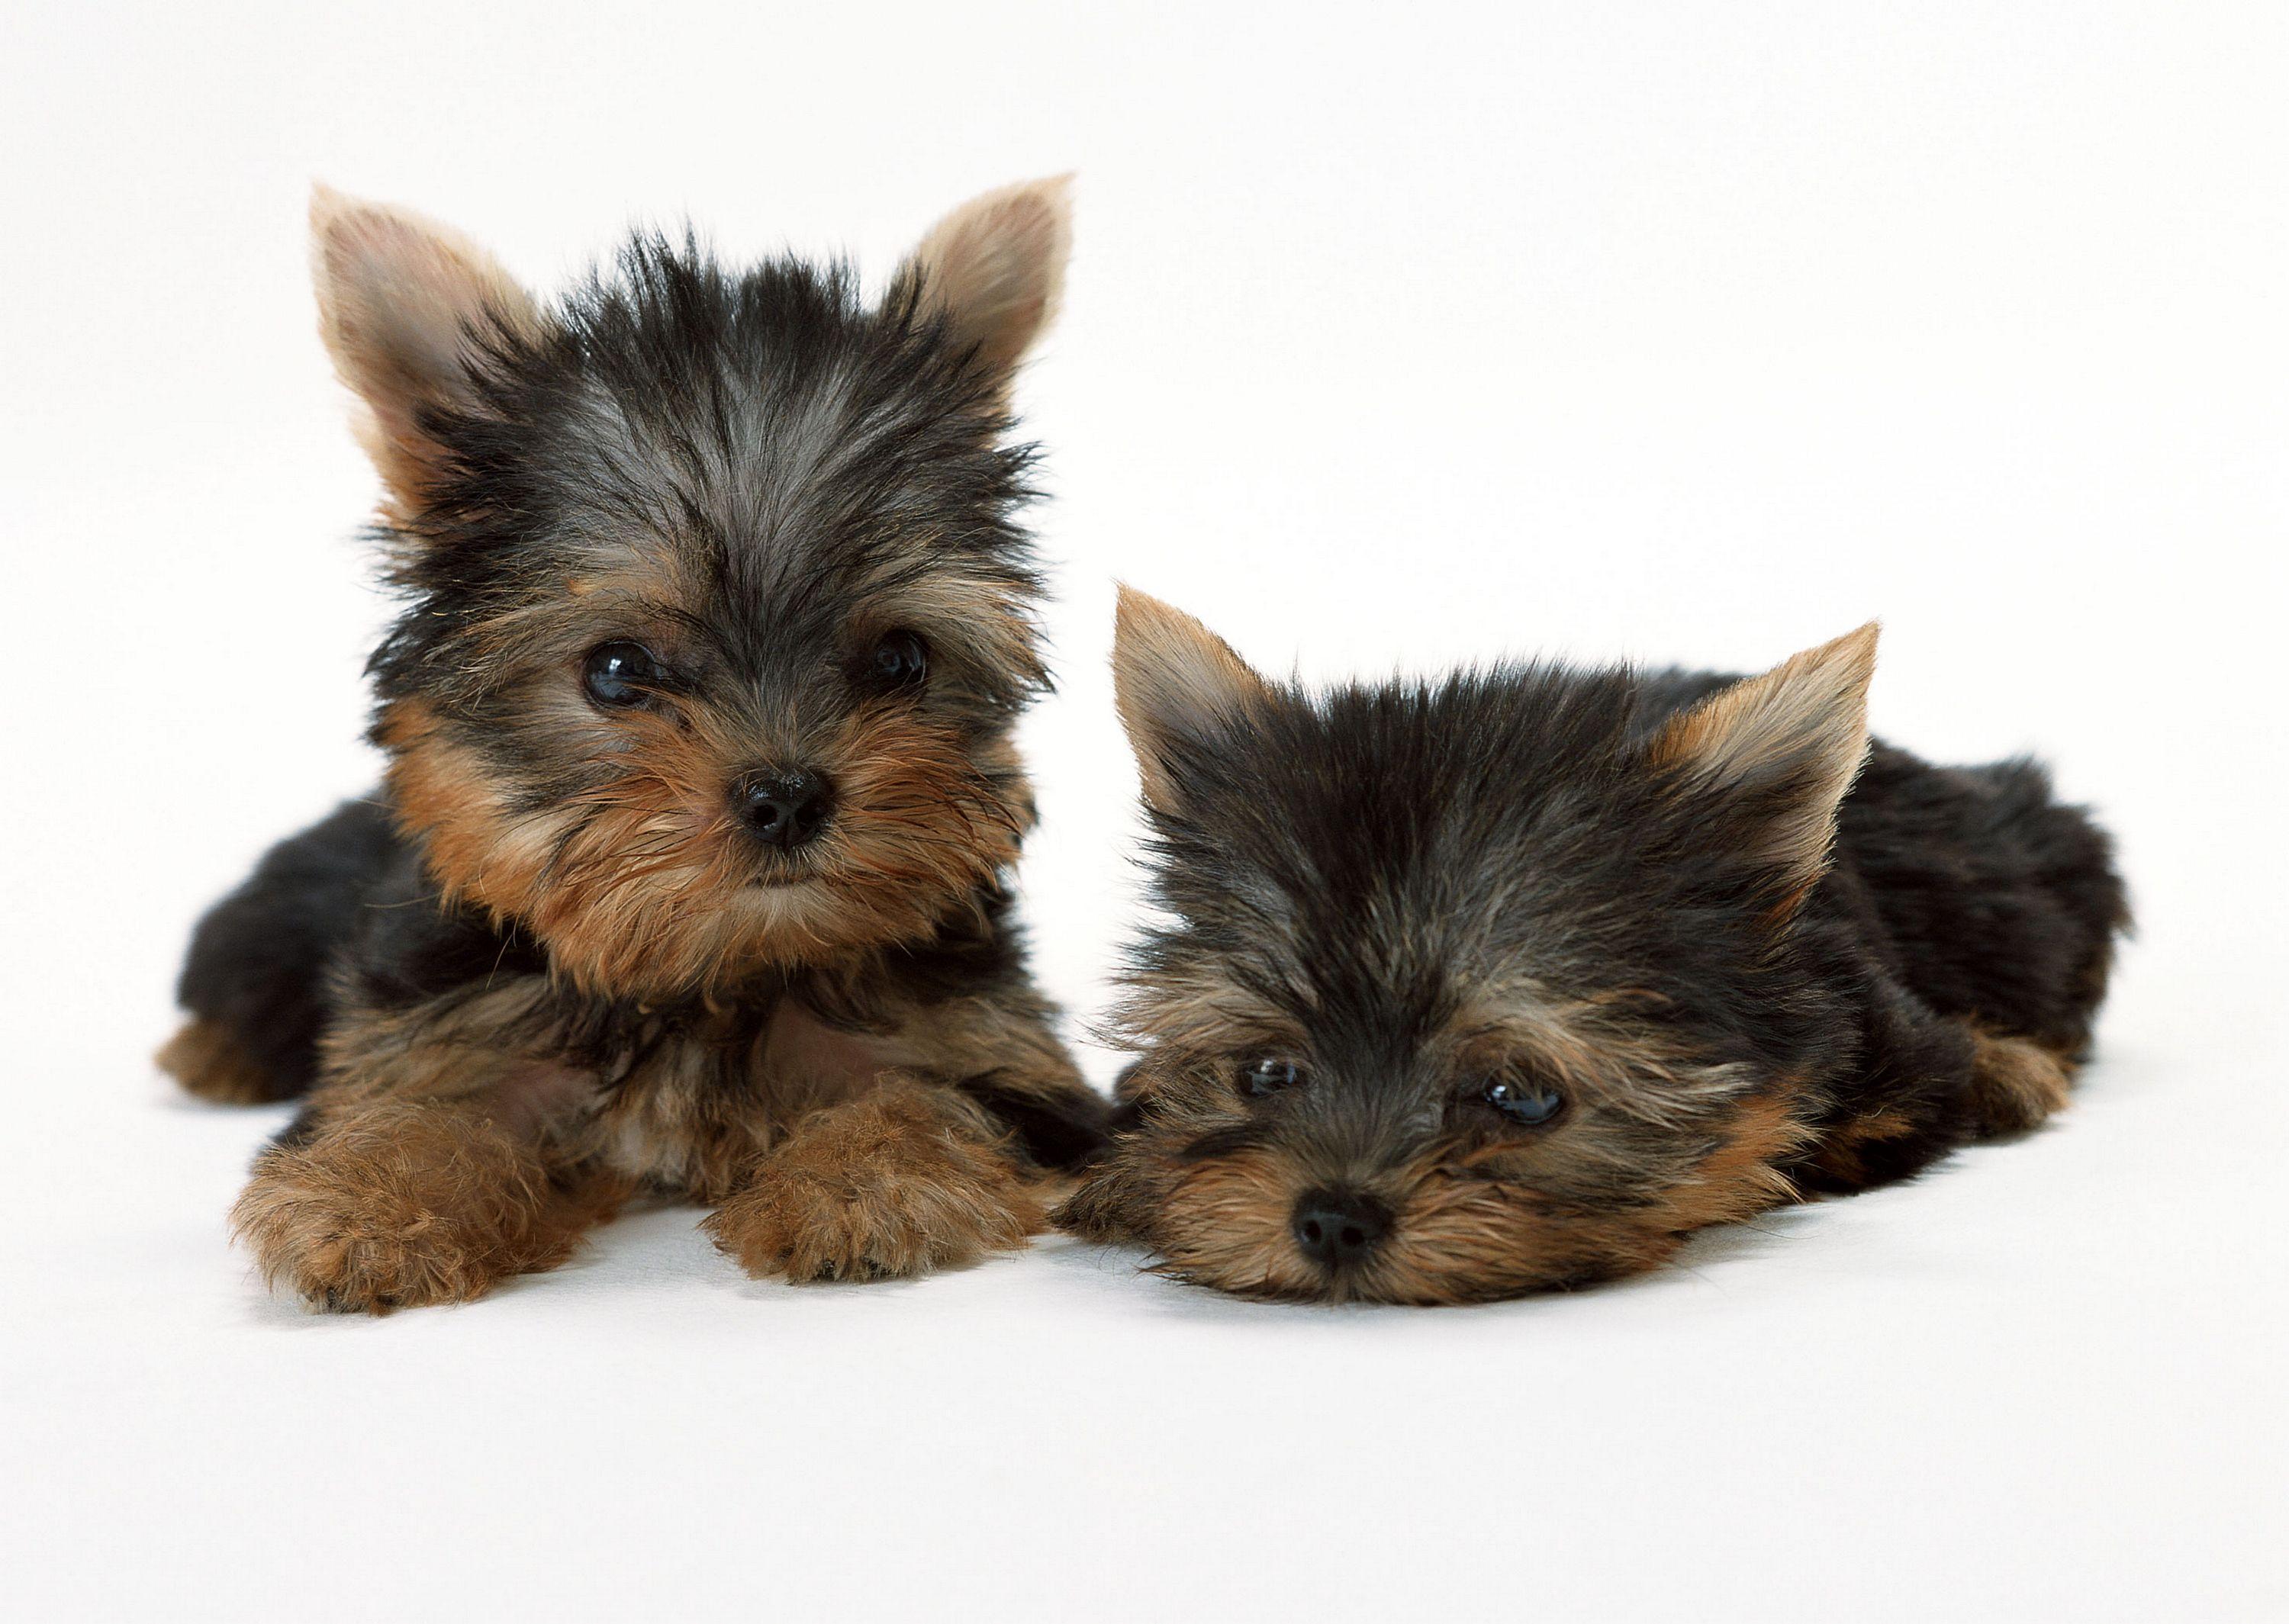 Free Yorkshire Terrier Wallpaper 2 Background Full Grown Yorkie Pictures  Background Image And Wallpaper for Free Download